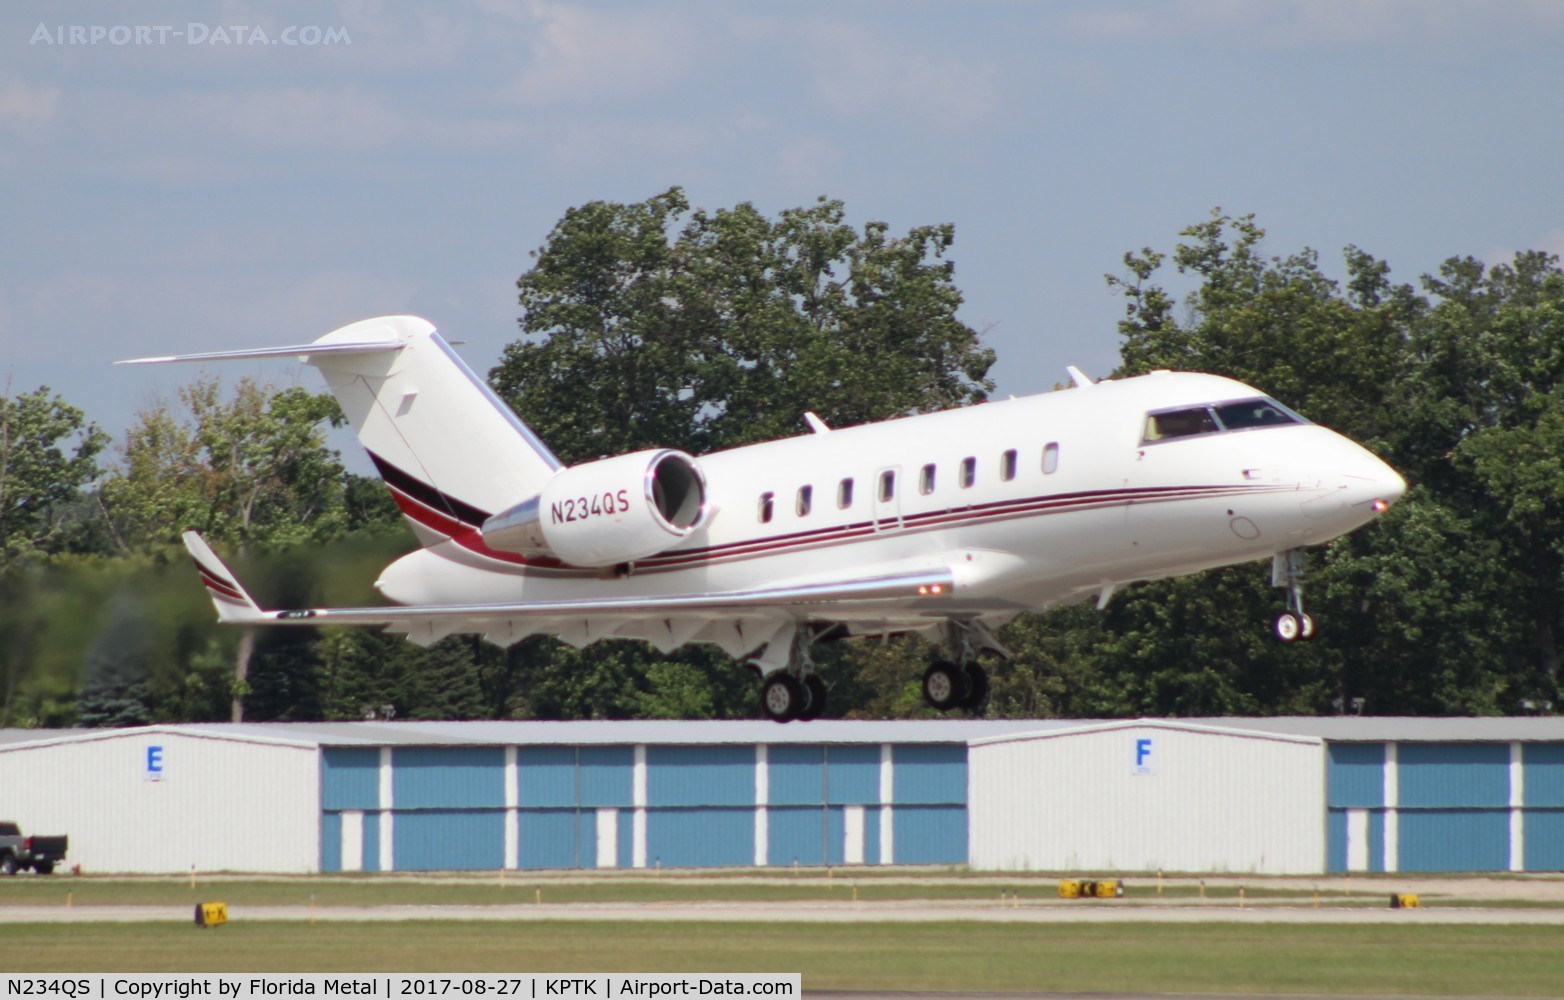 N234QS, 2017 Bombardier Challenger 650 (CL-600-2B16) C/N 6097, Challenger 650 zx